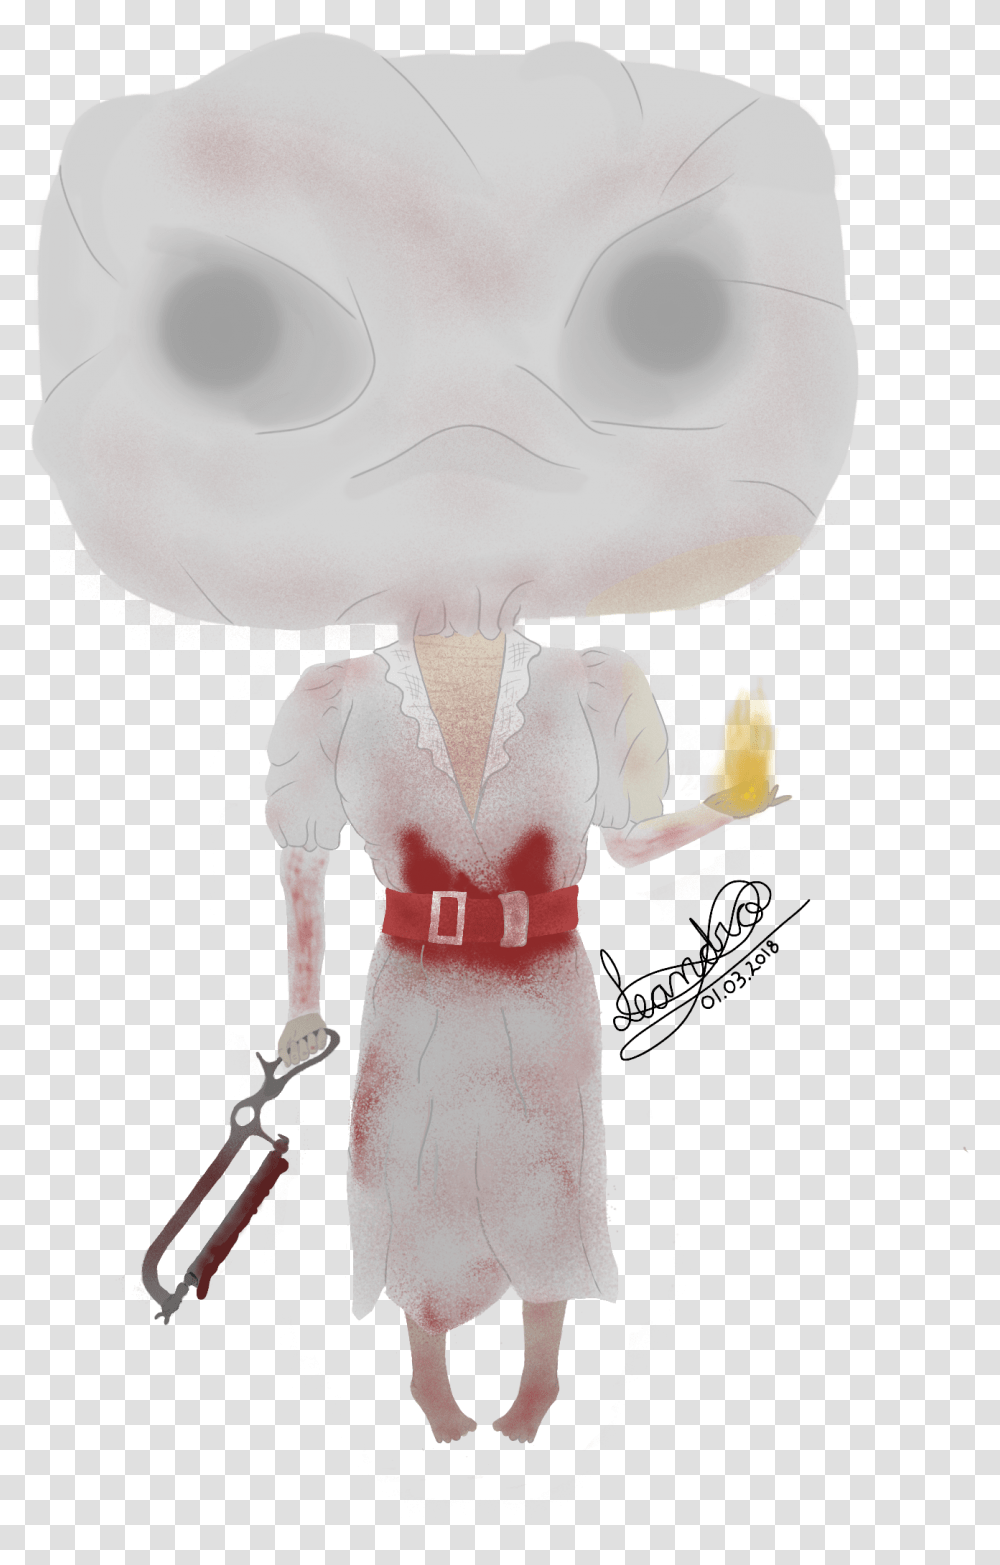 Https Us V Cdn Funko Pop Dead By Daylight, Toy, Person, Human, Doll Transparent Png